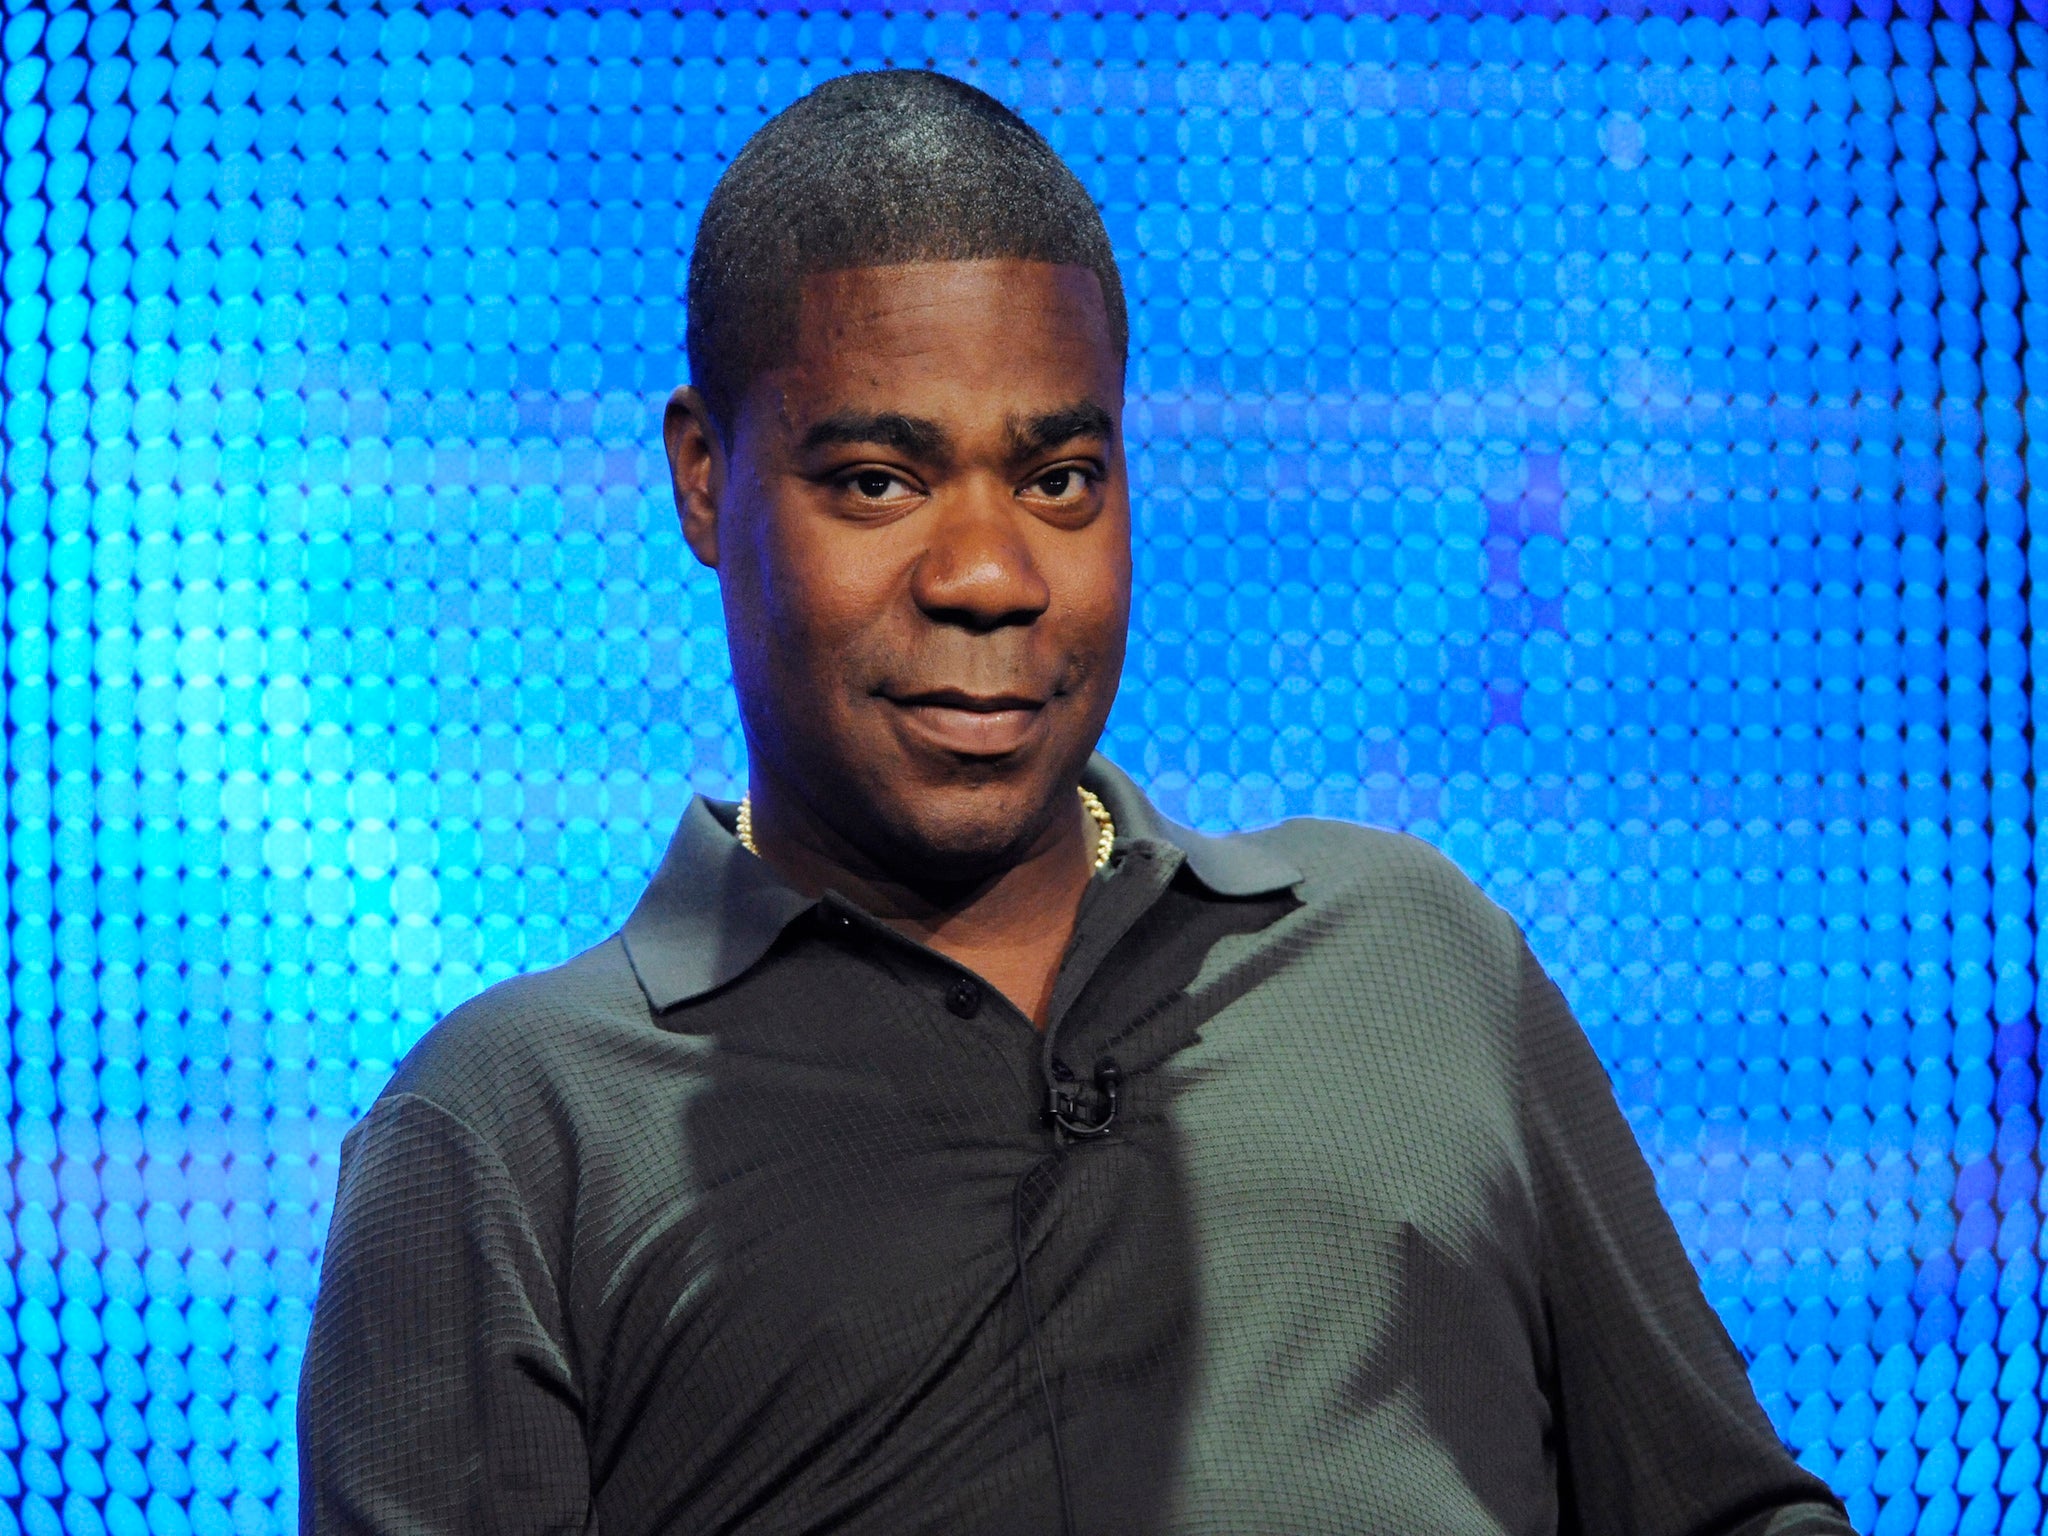 Tracy Morgan said he was not yet ready to return to comedy